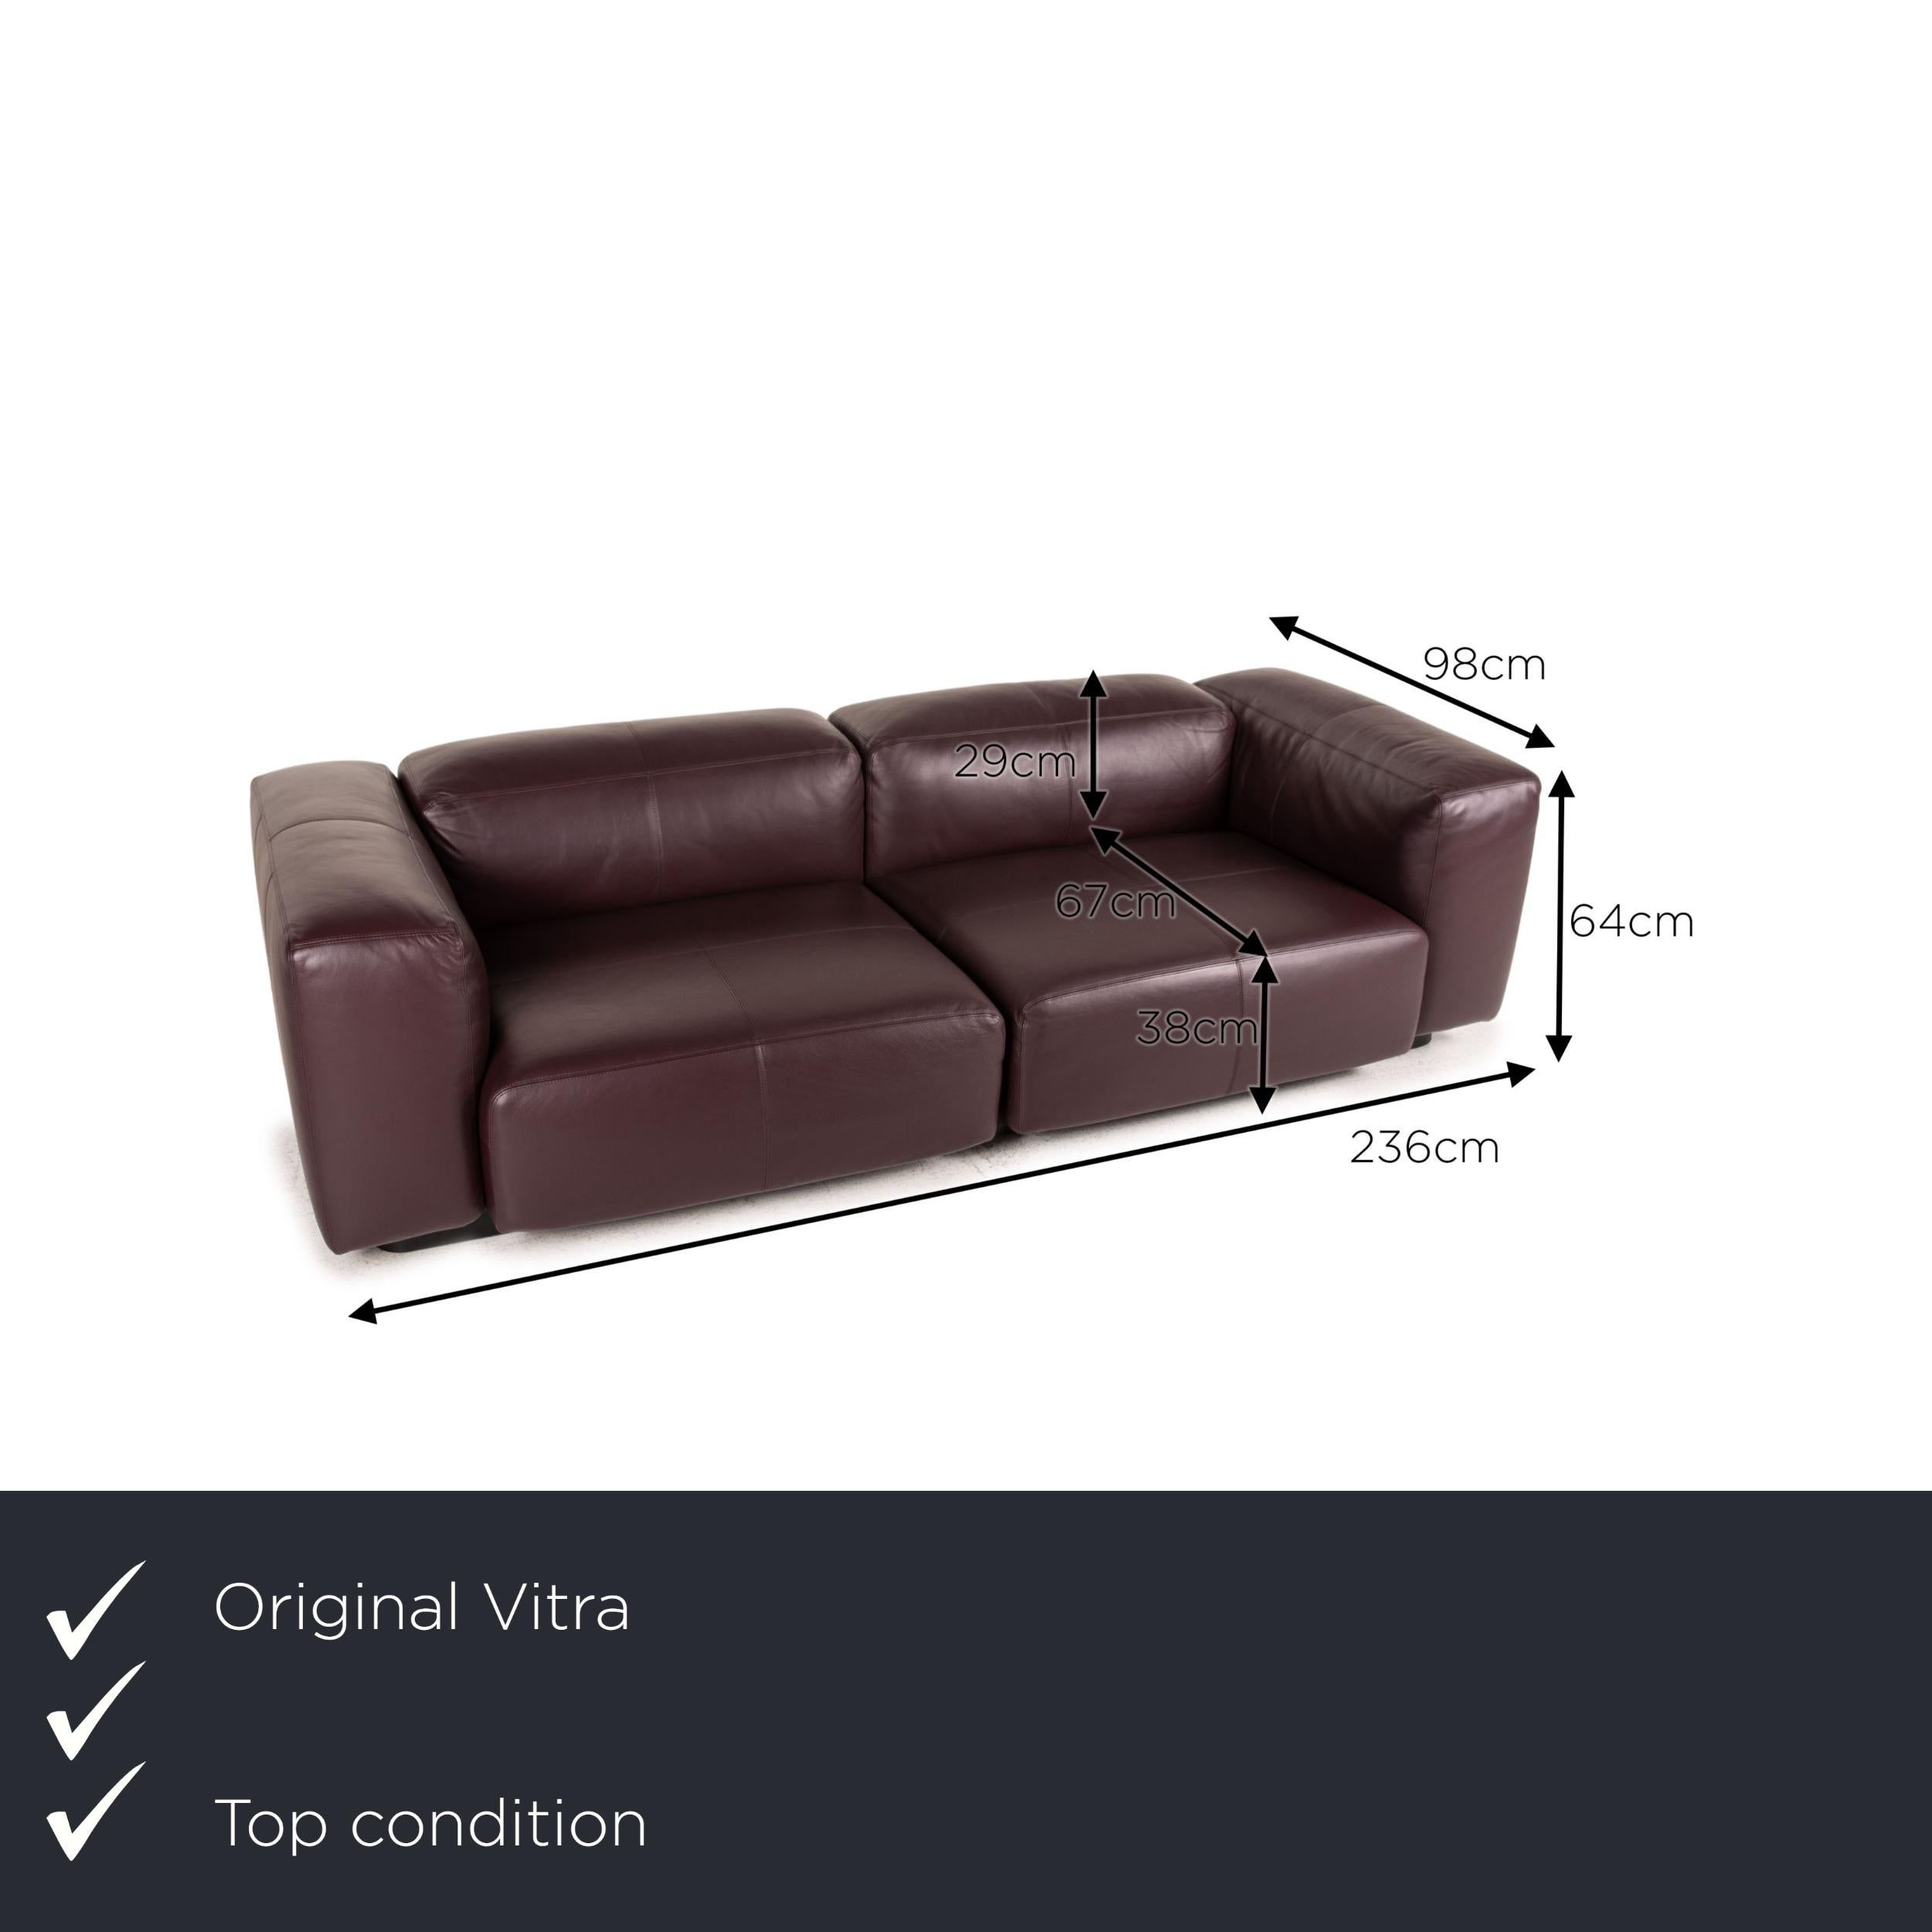 We present to you a vitra soft modular leather sofa purple two-seater couch.
 
 

 Product measurements in centimeters:
 

 depth: 98
 width: 236
 height: 64
 seat height: 38
 rest height: 64
 seat depth: 67
 seat width: 174
 back